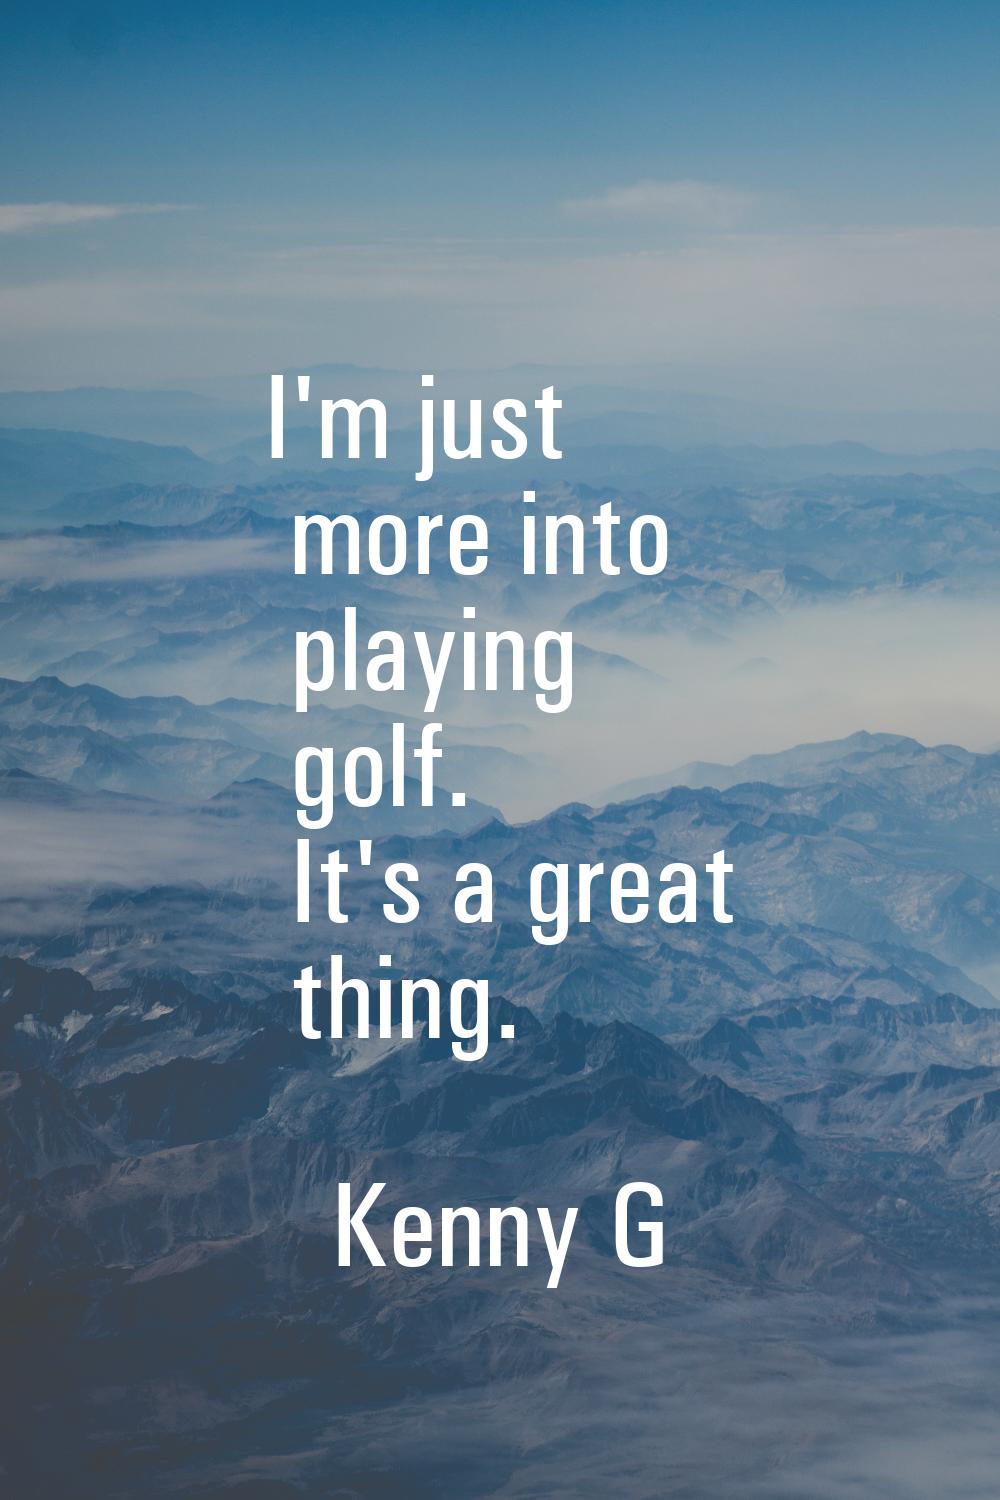 I'm just more into playing golf. It's a great thing.